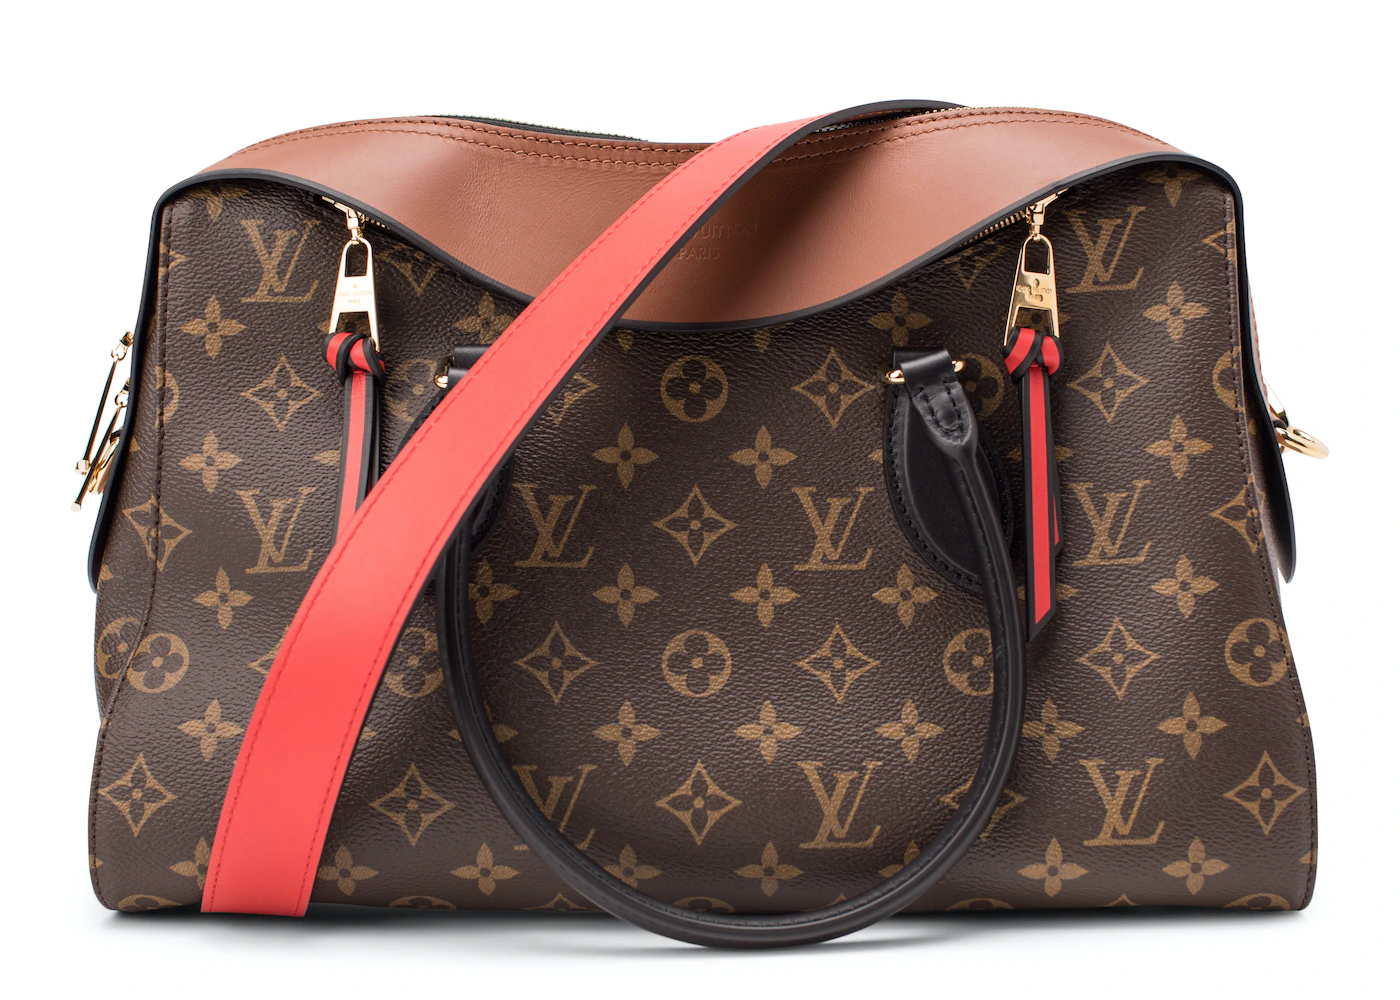 lv bag with red handles